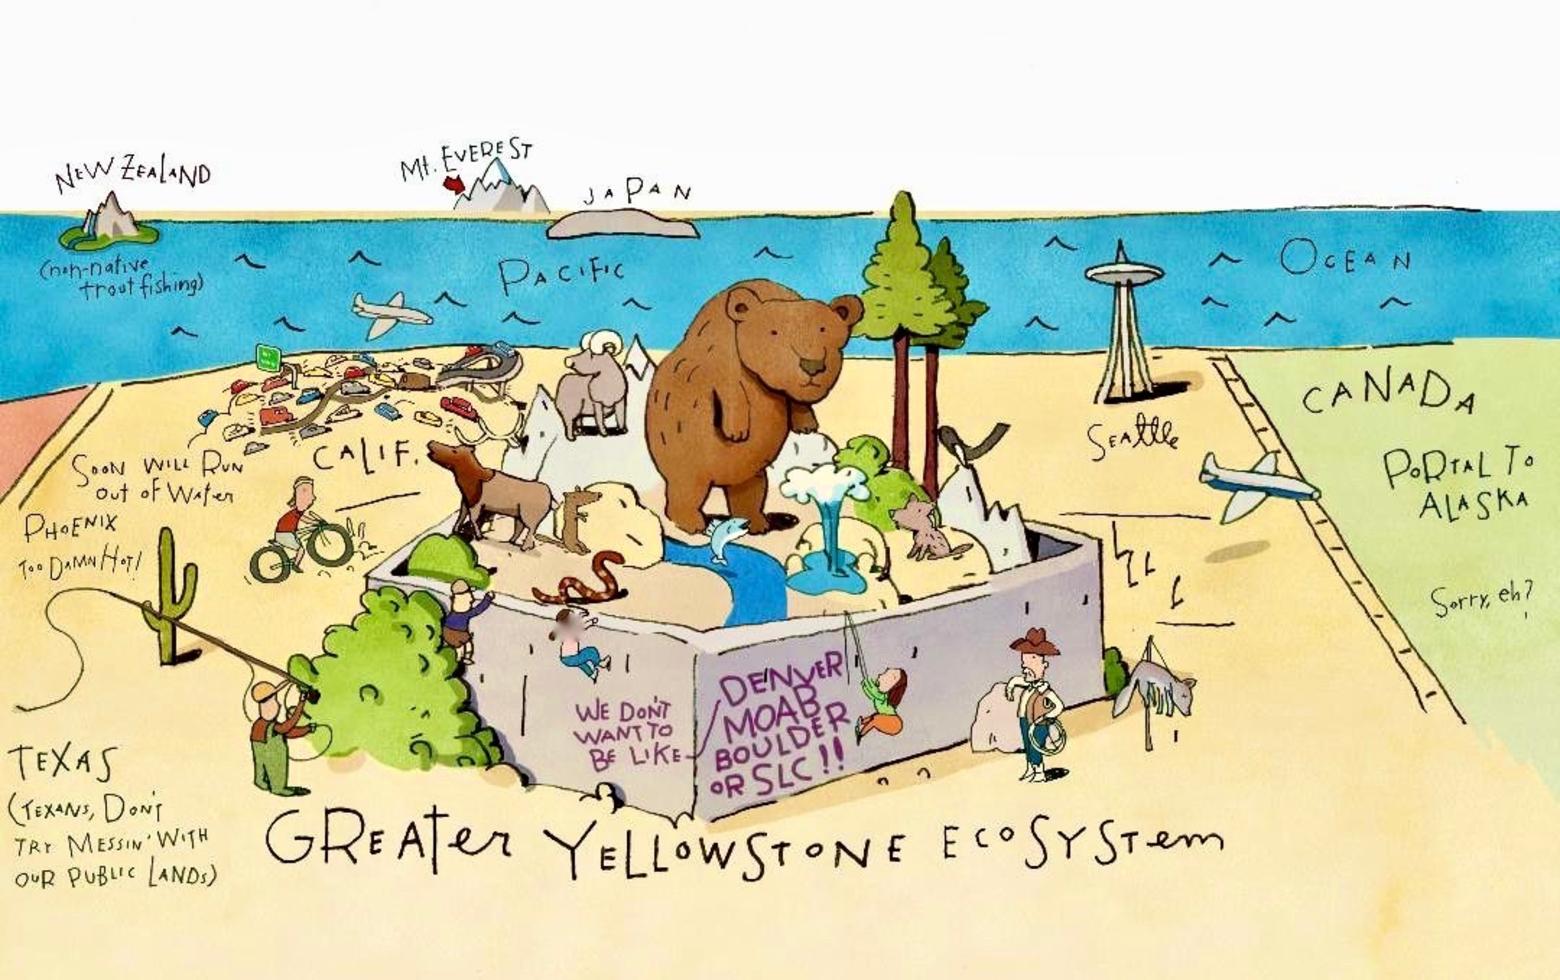 Greater Yellowstone's special place in the West stands in stark contrast to other areas where outdoor recreation has not only eroded wildlife values but where wildlife protection is no longer a priority among public land management agencies, local communities and even conservation organizations.  Illustration by Rick Peterson